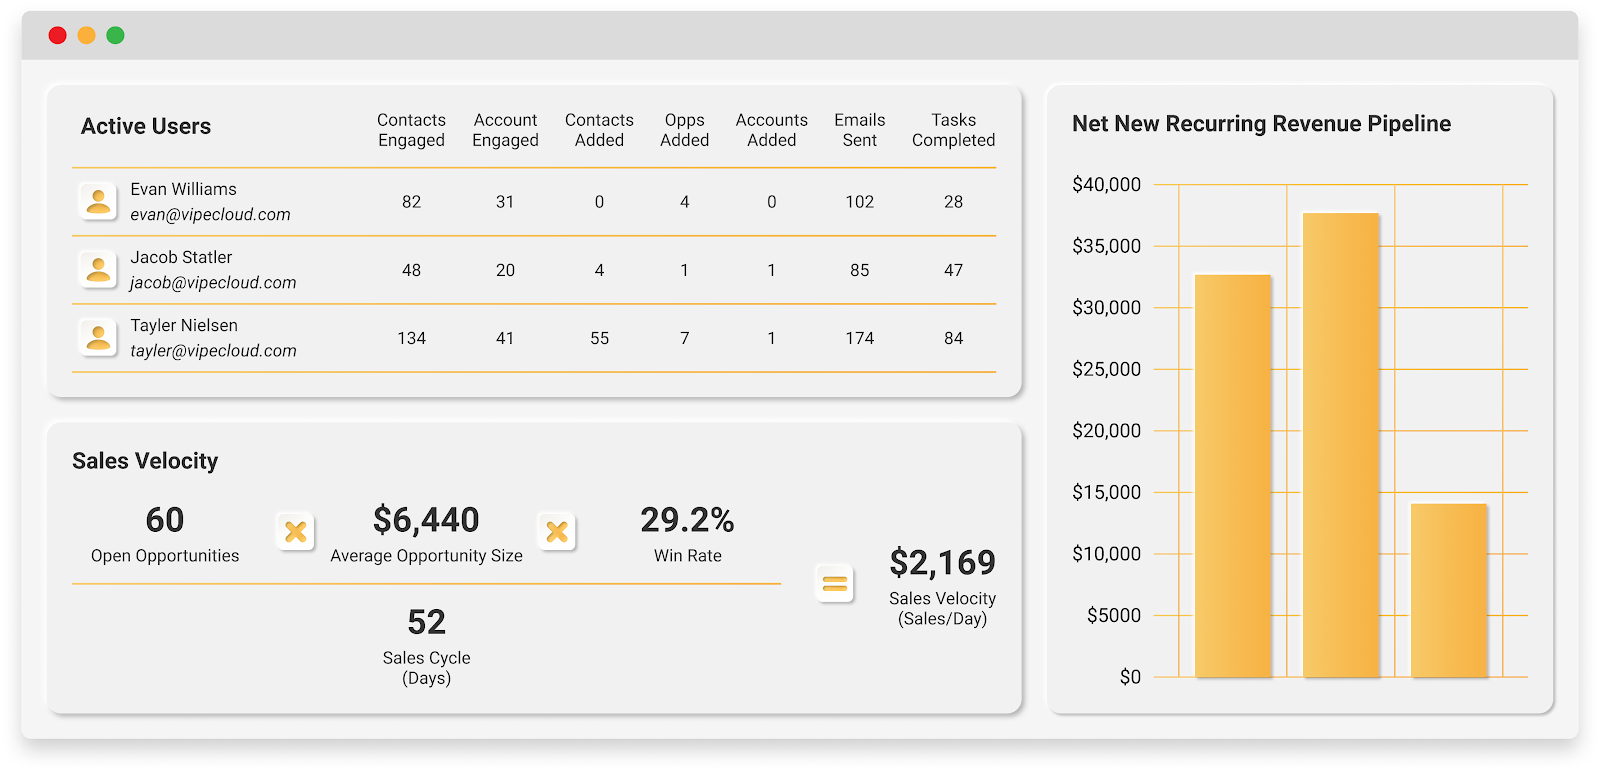 Mockup showing VipeCloud sales CRM's reporting